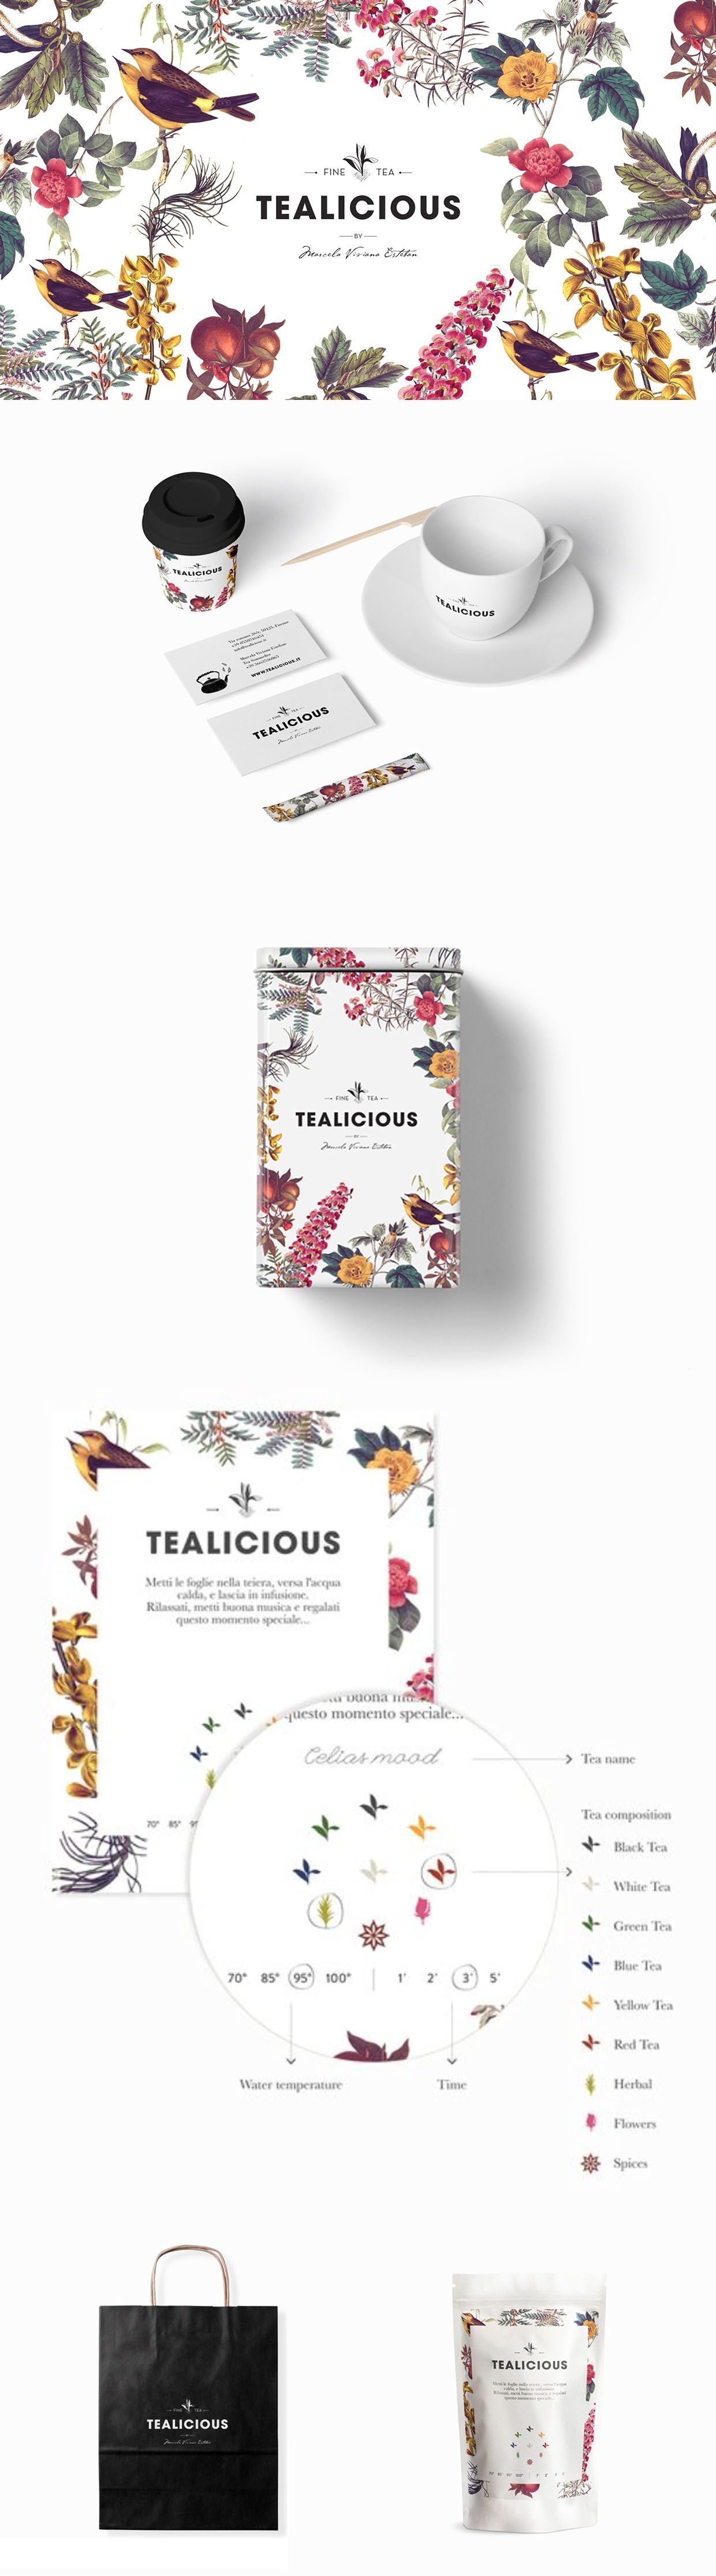 Tealicious merchandise and take-out supplies are framed around a luscious botanical garden. /